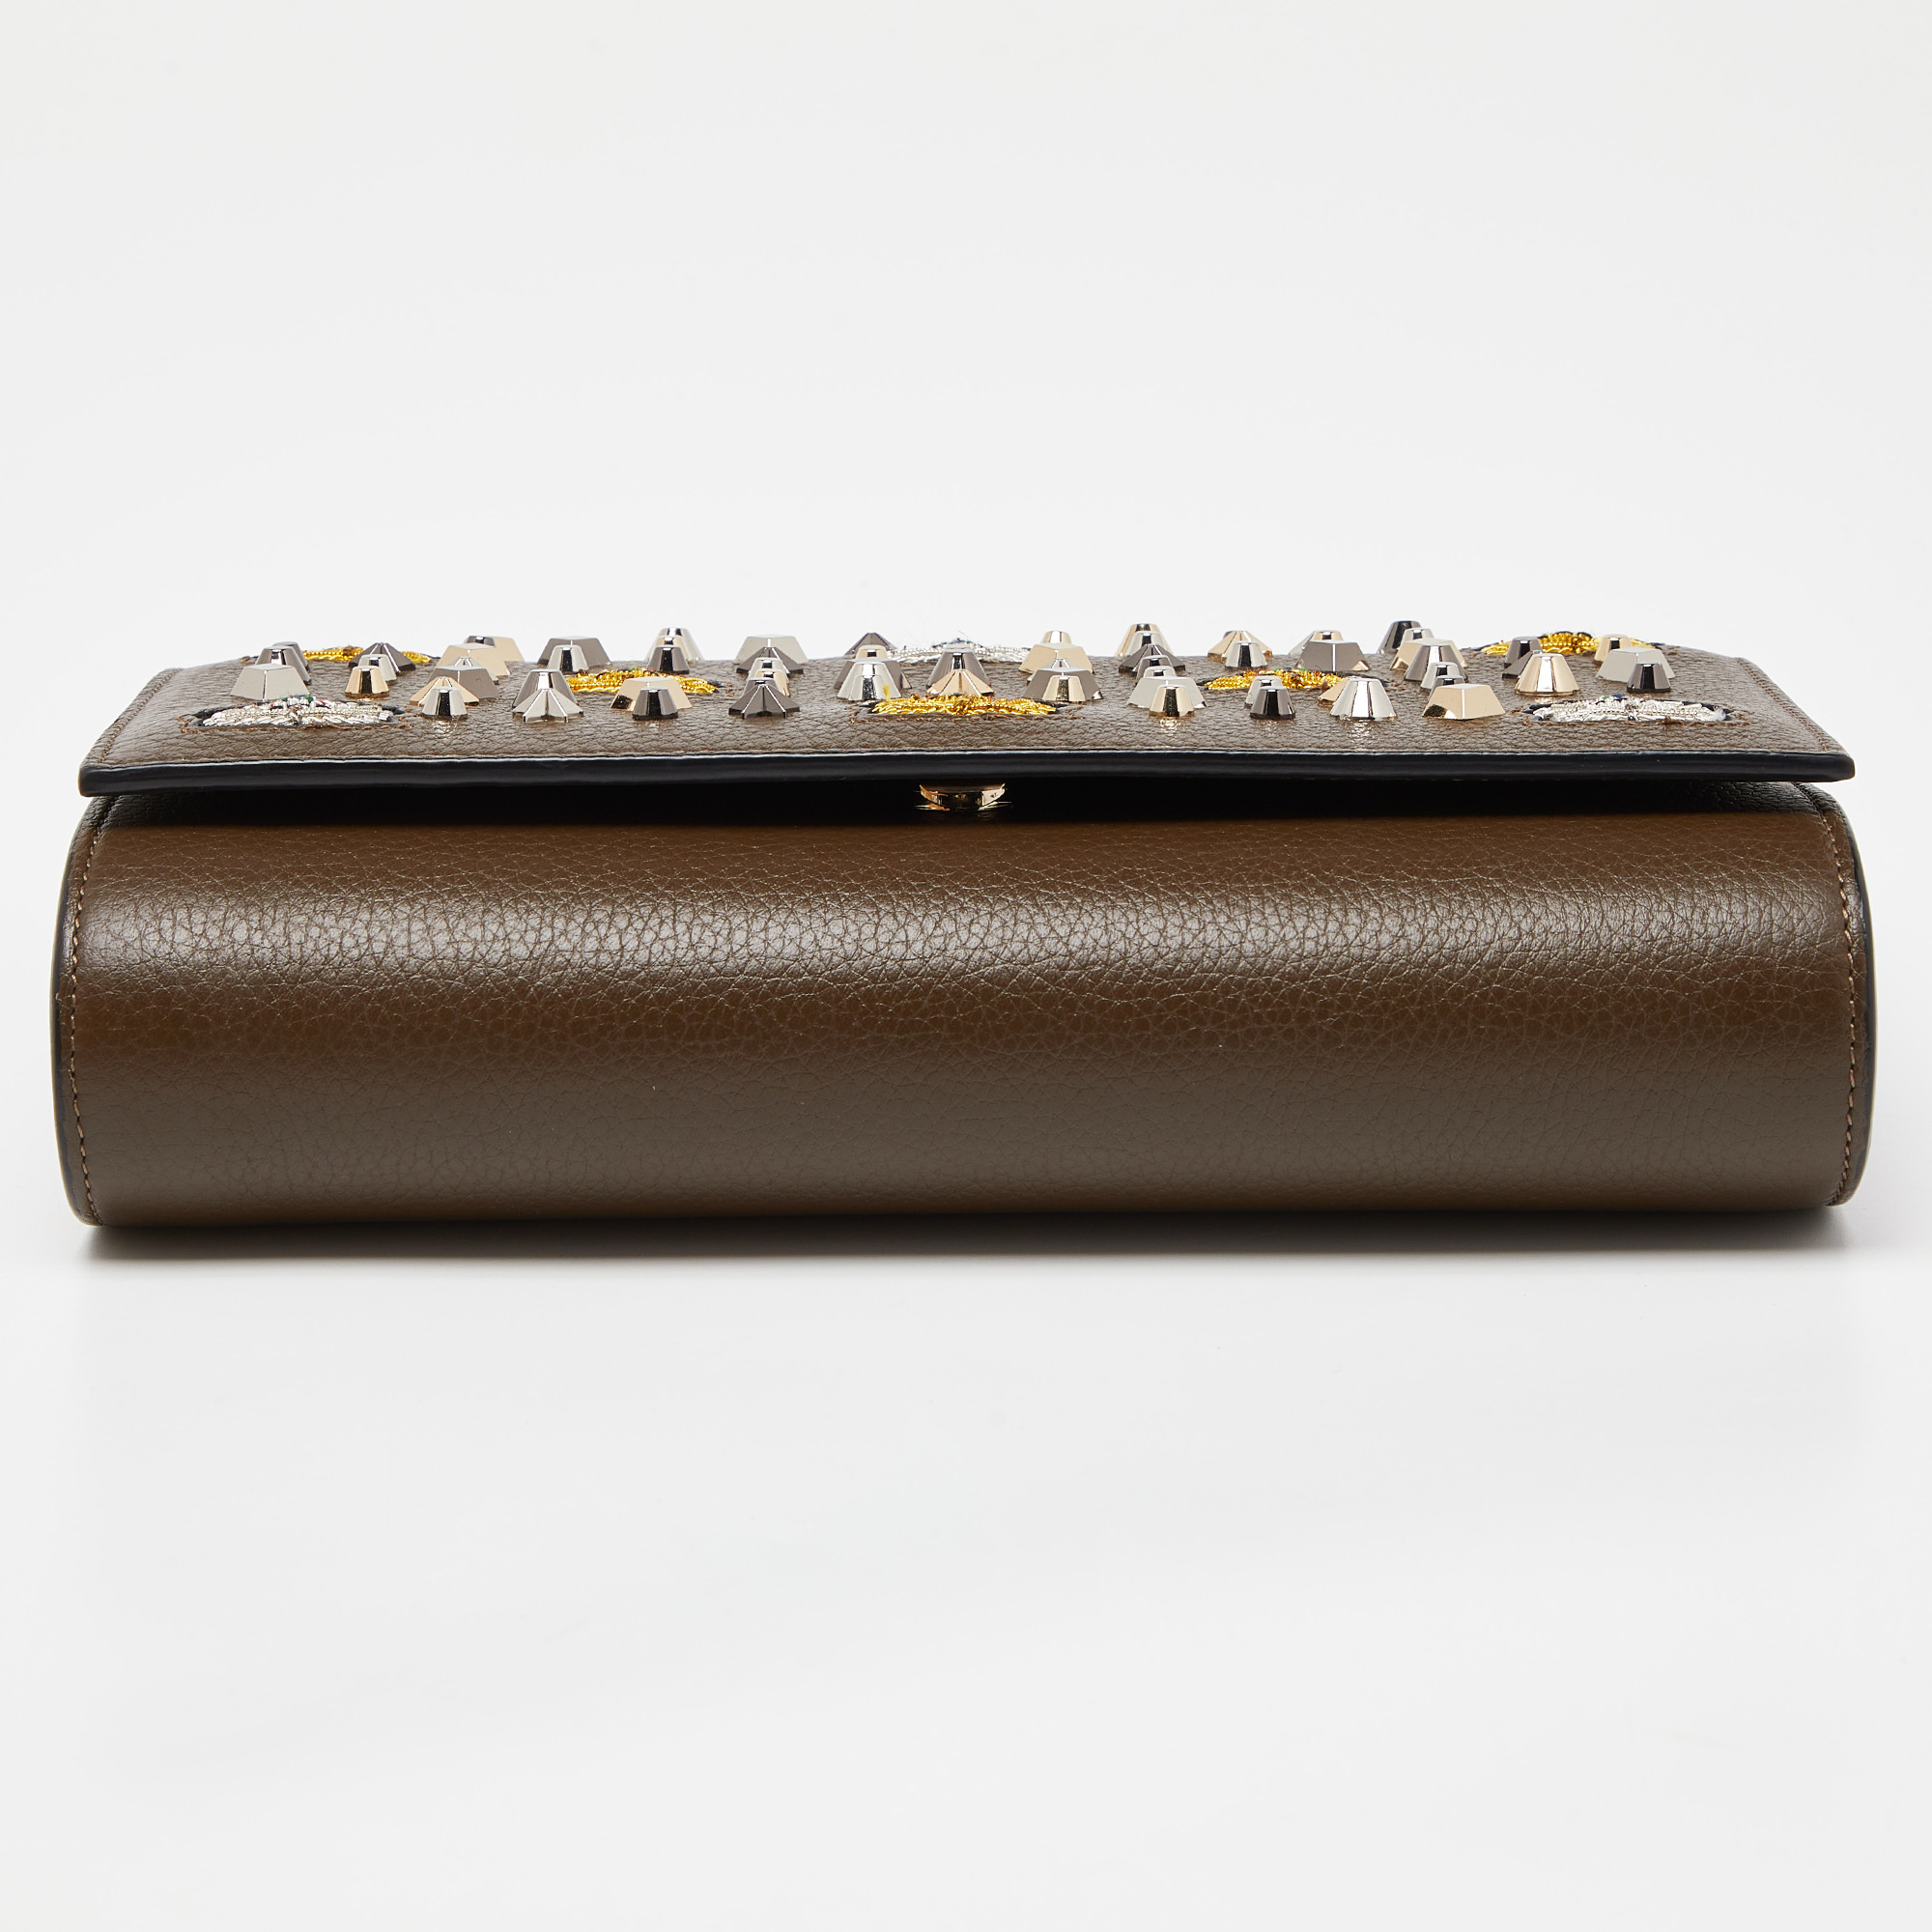 Christian Louboutin Olive Patent And Leather Paloma Embellished Chain Clutch